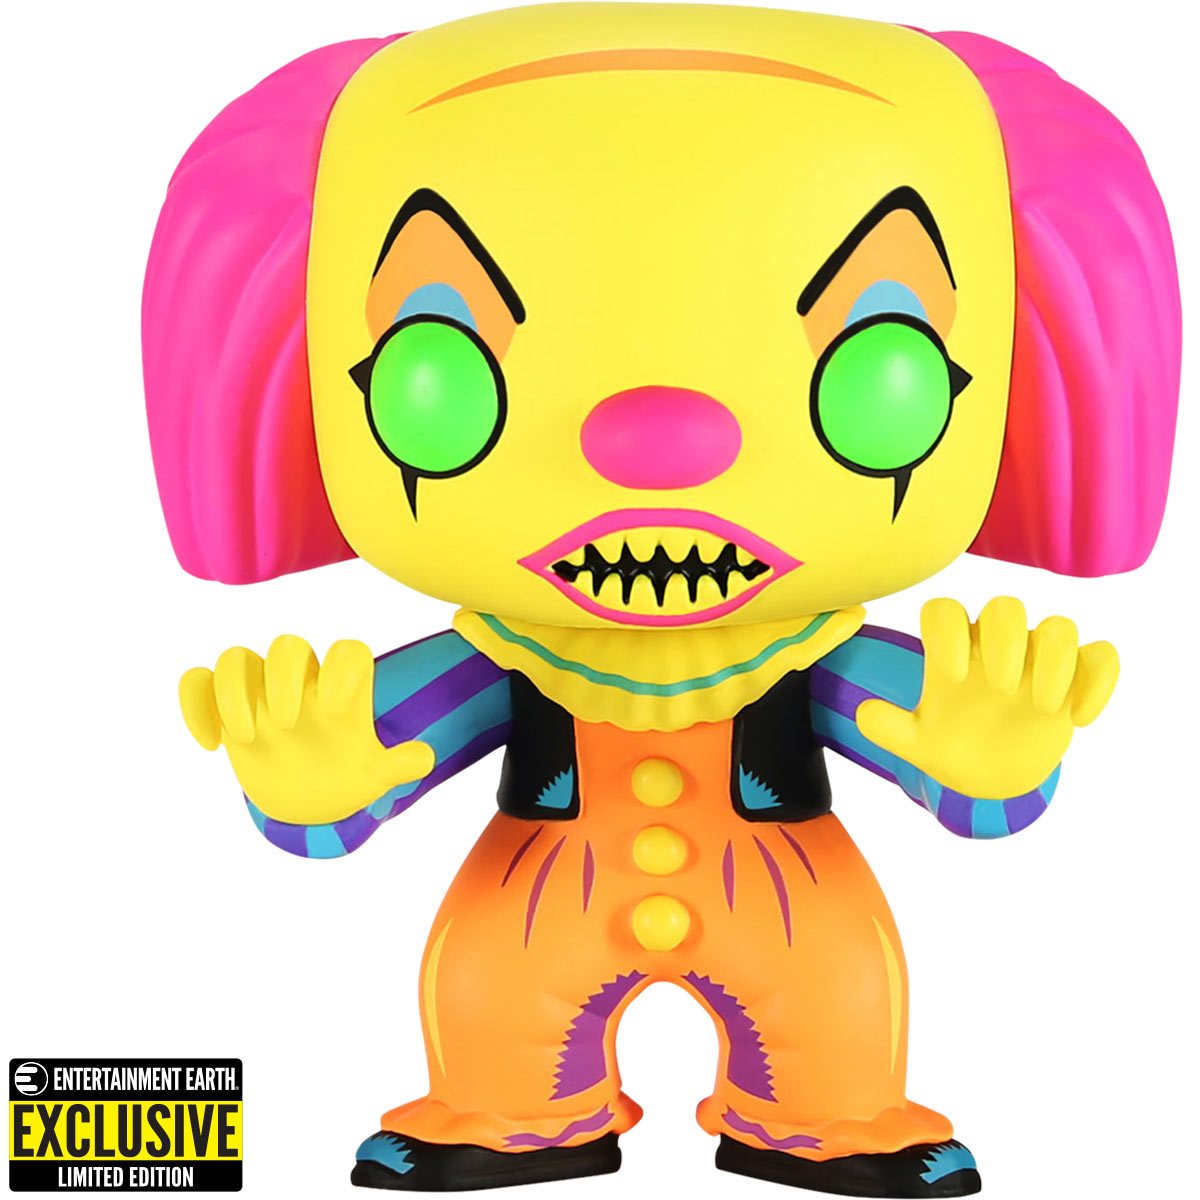 Pennywise without Make-Up Funko Pop! #876 - The Pop Central